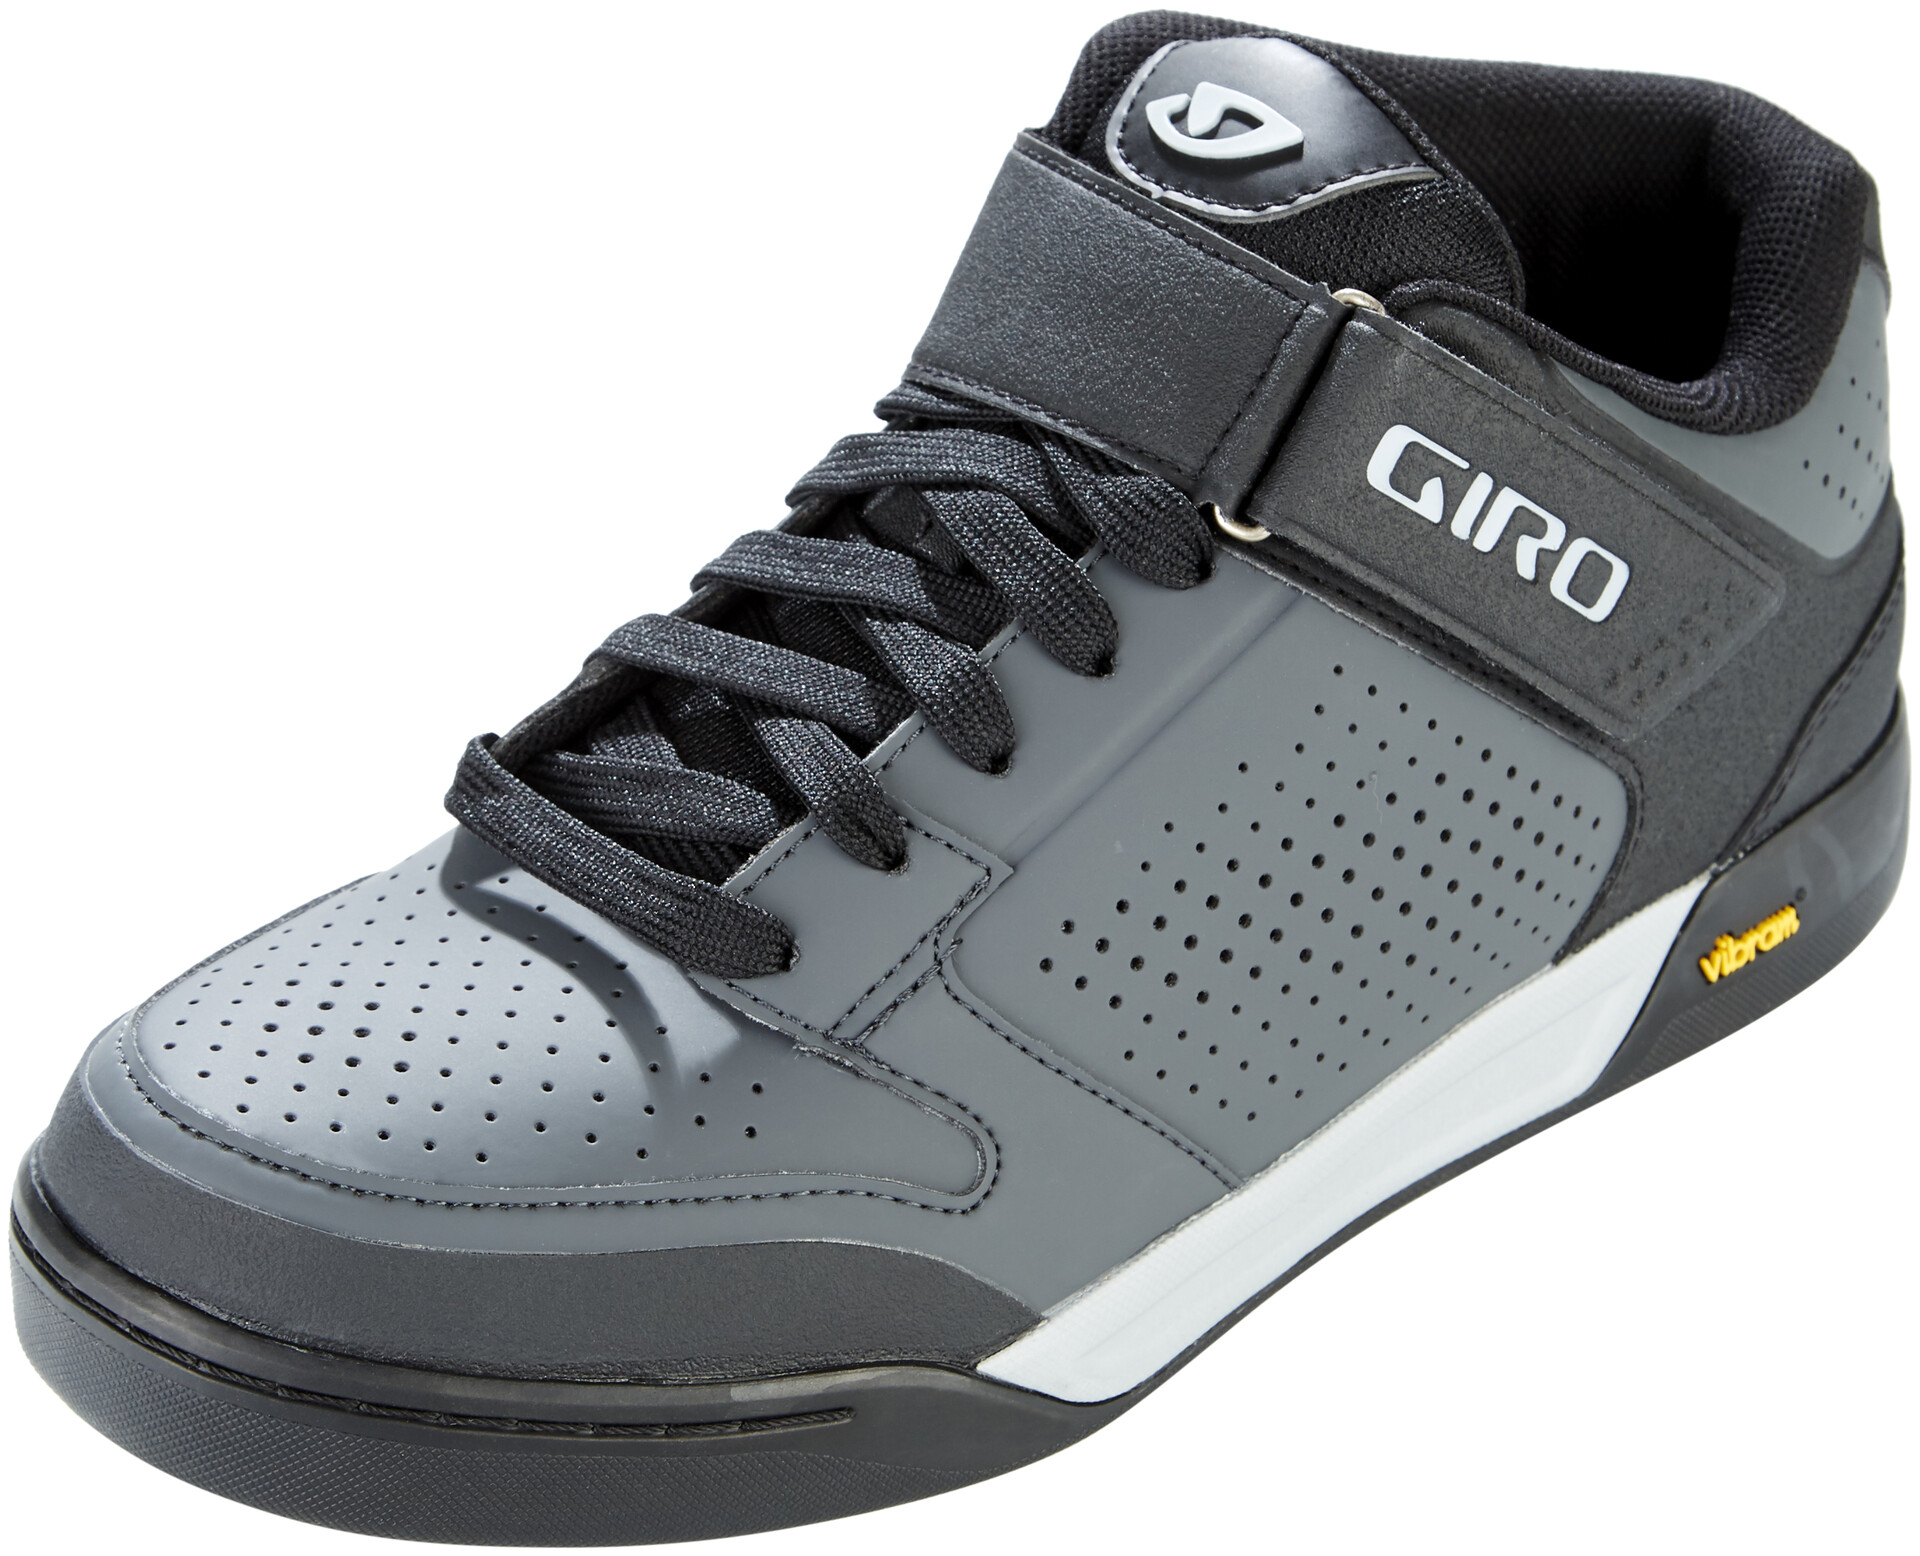 giro riddance mid review